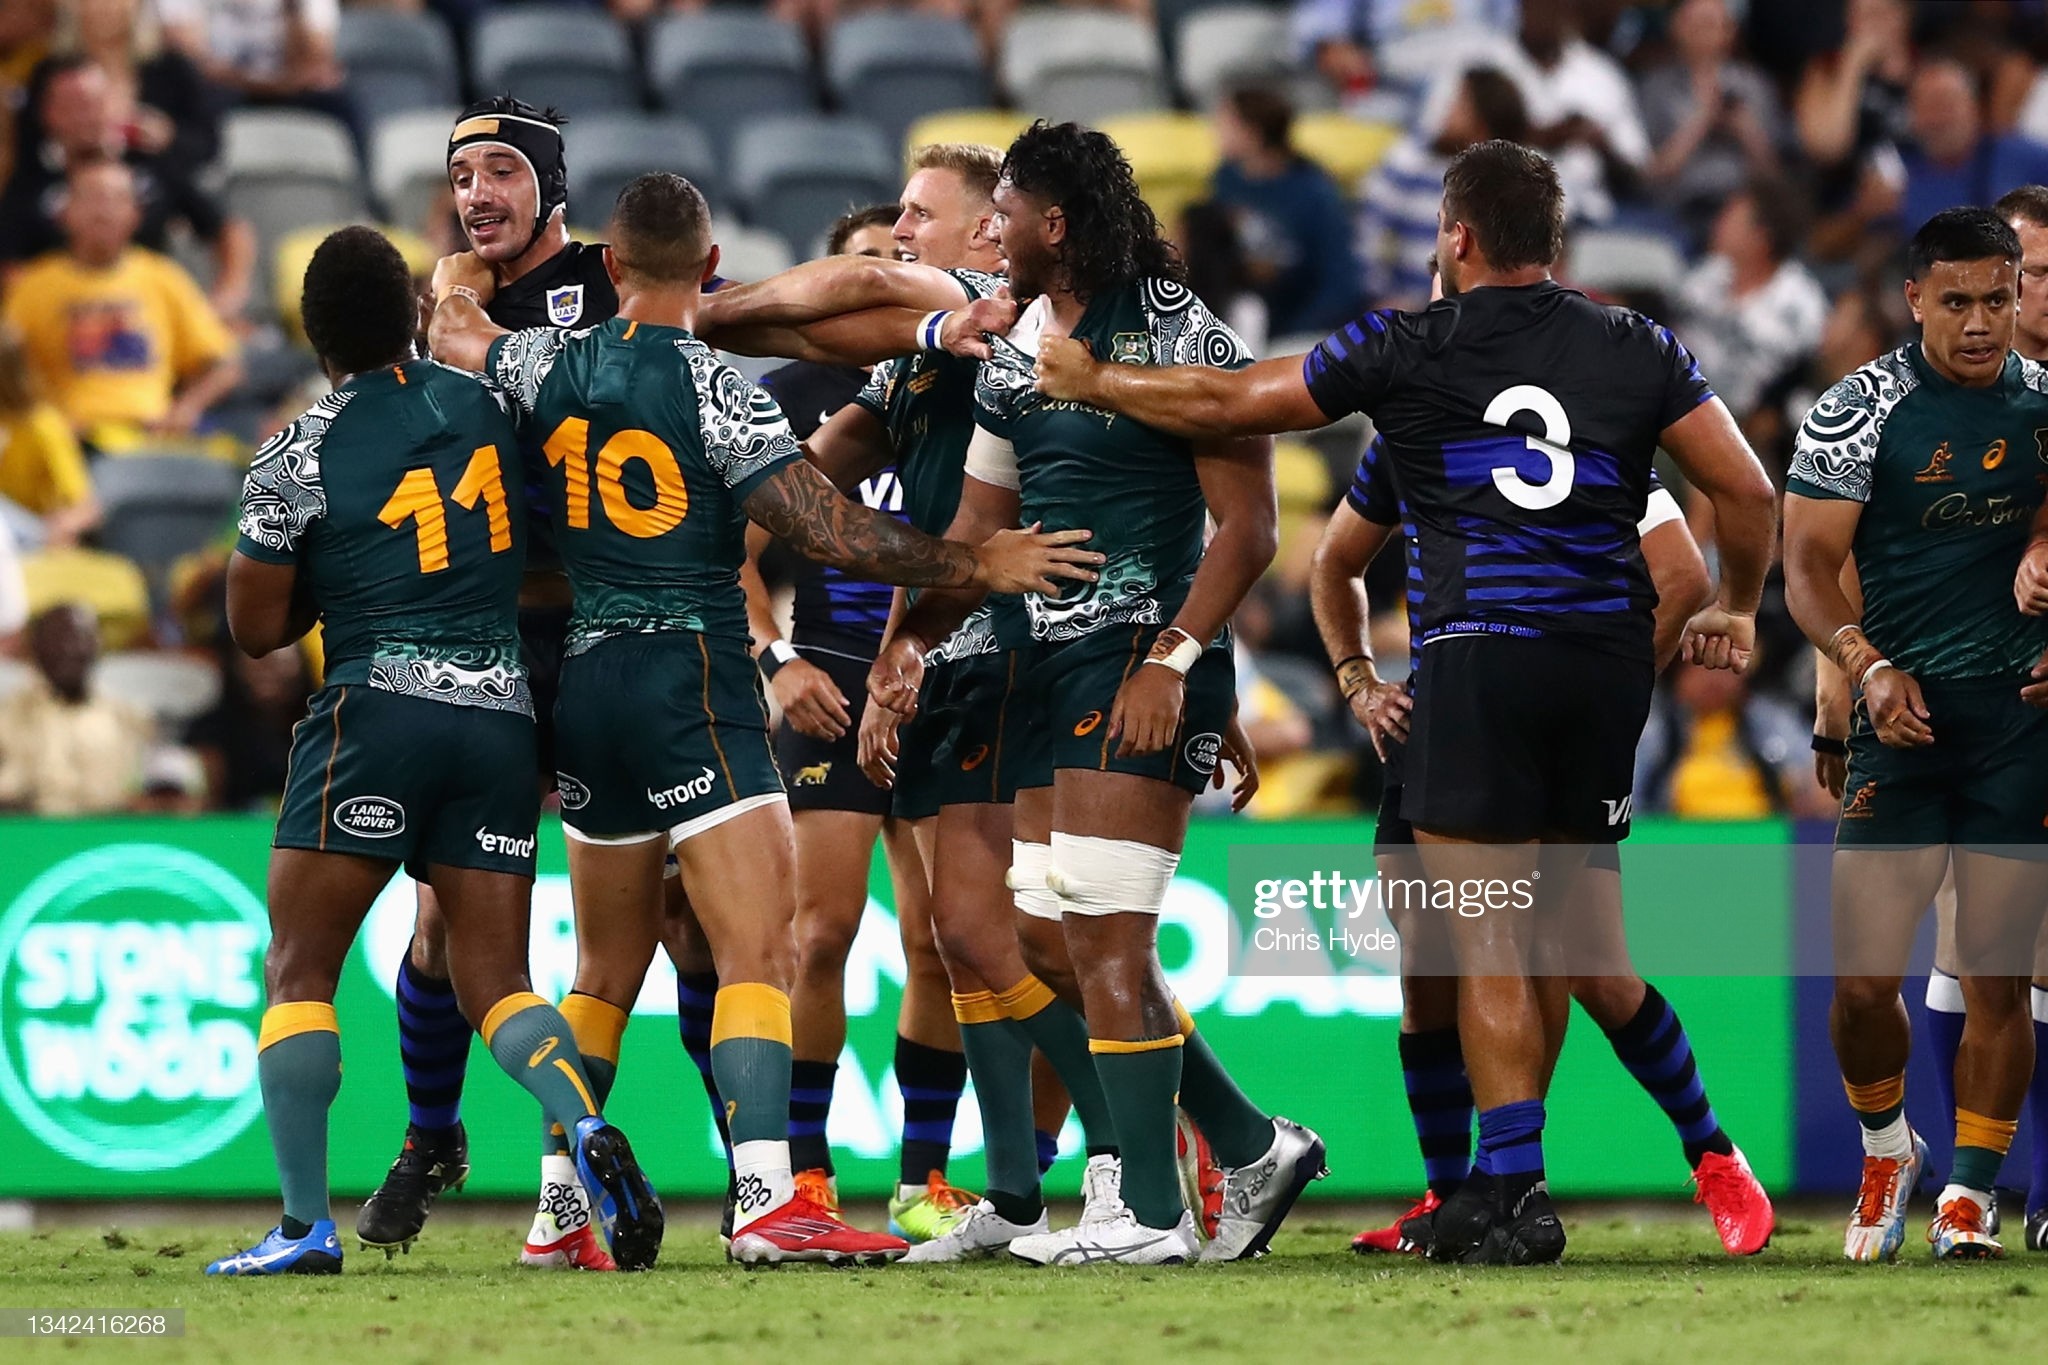 pumas-and-wallabies-players-exchange-words-during-the-rugby-match-picture-id1342416268